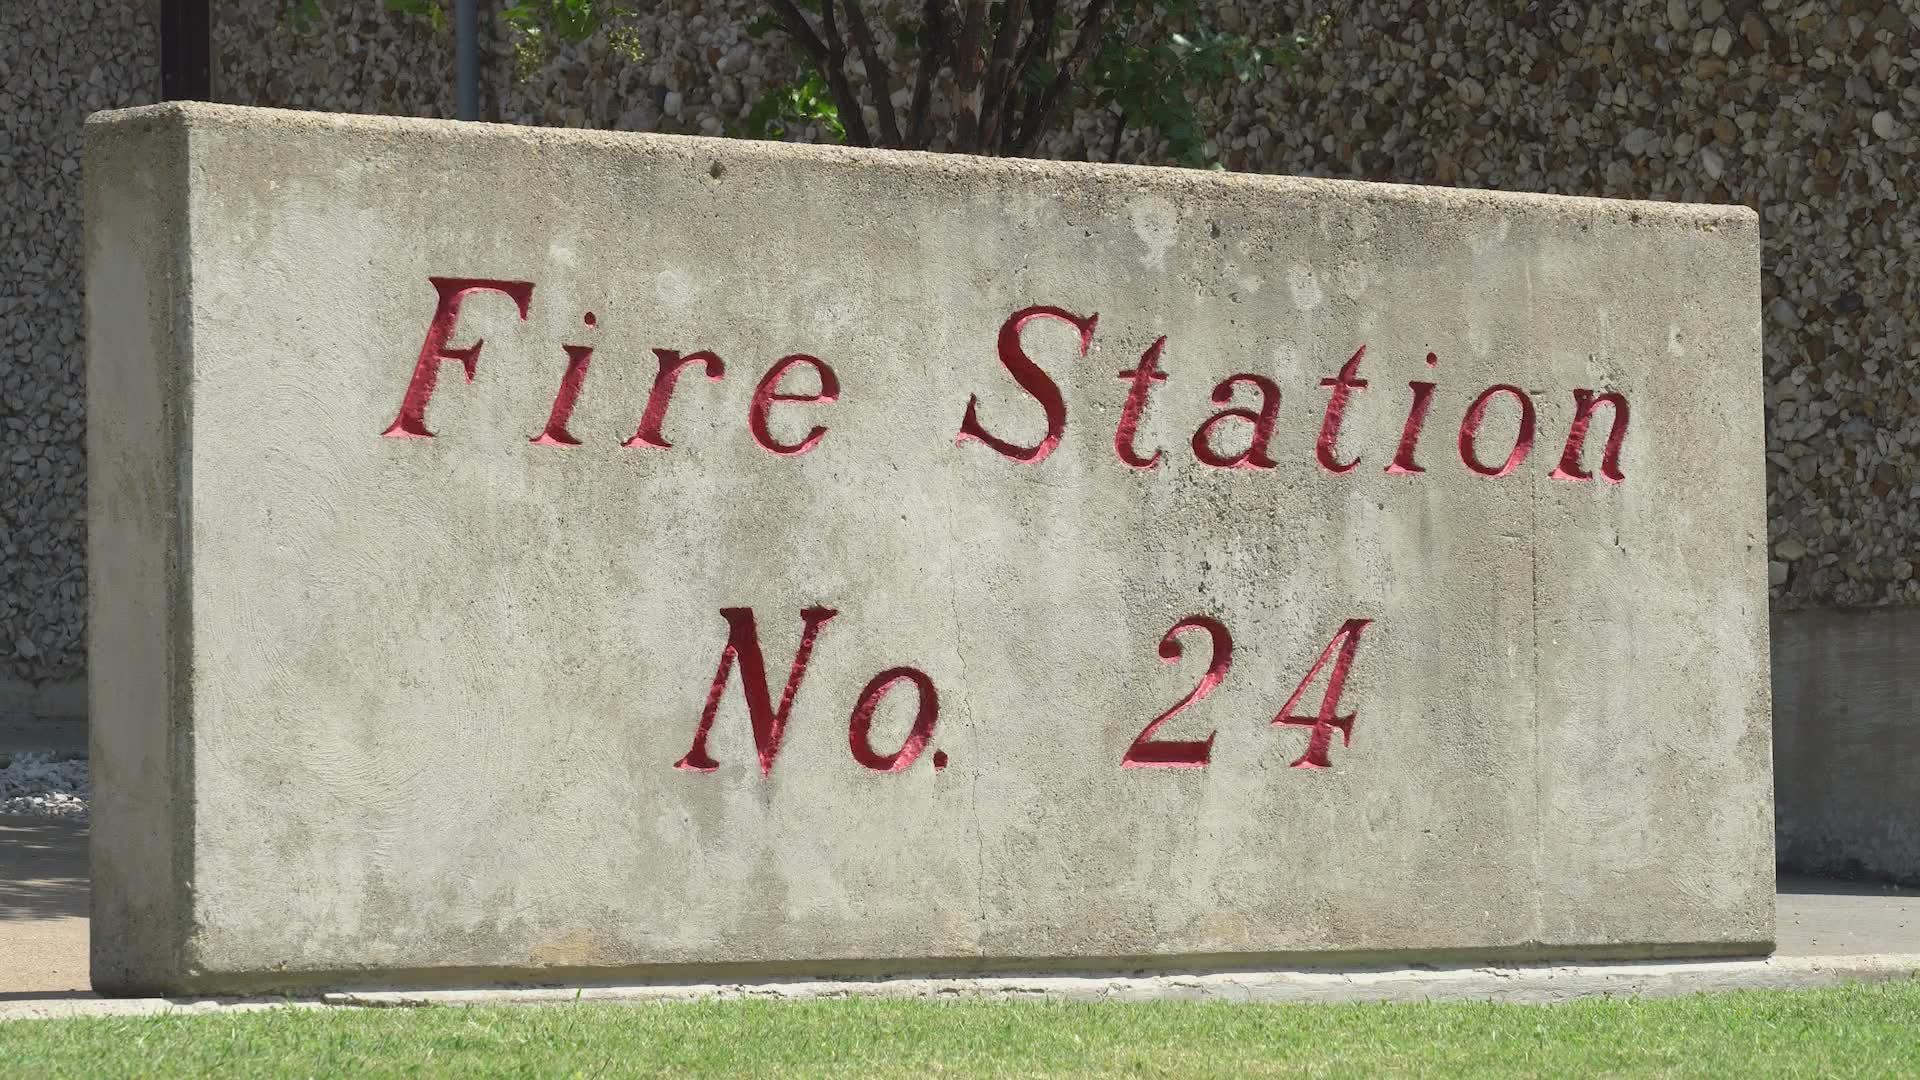 City fire stations have had multiple problems with maintenance throughout the years.